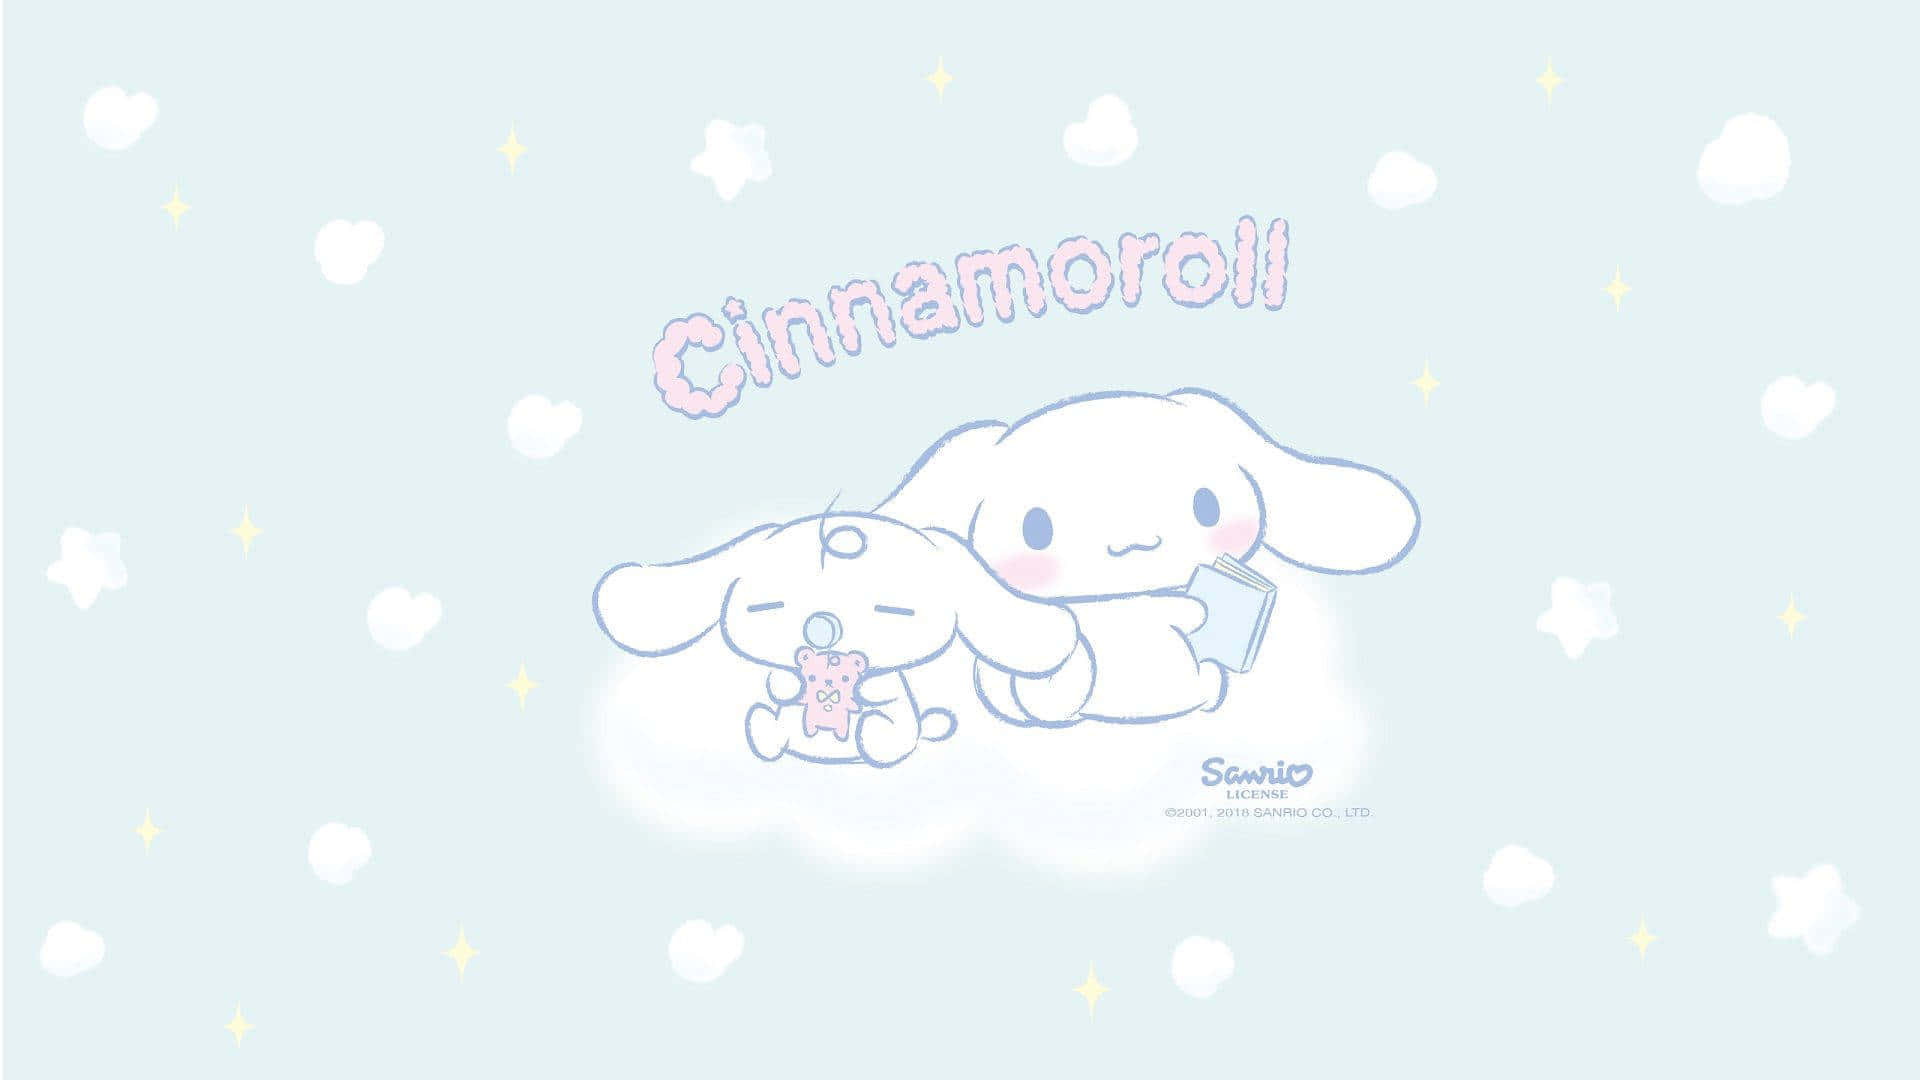 Enjoy desktop wallpaper featuring Cinnamoroll, the adorable white puppy with a cotton candy-like tail. Wallpaper